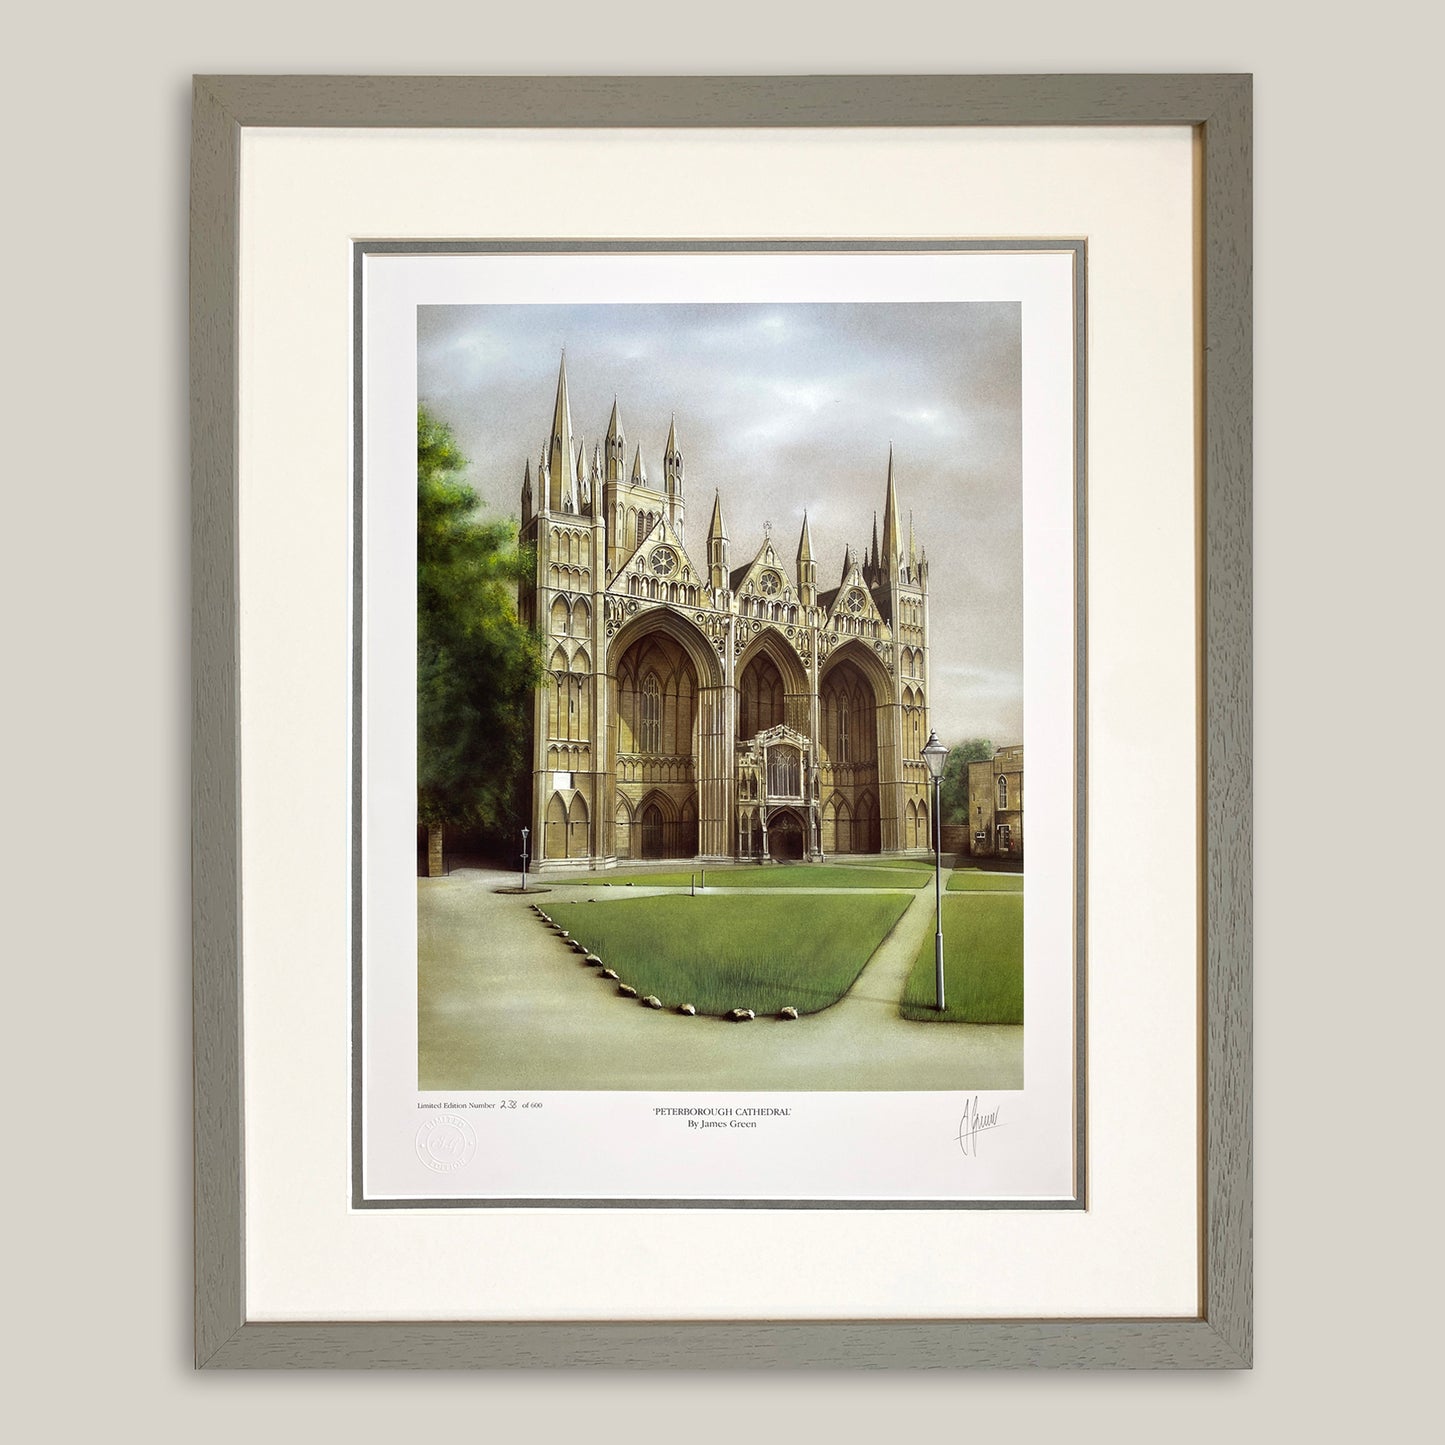 Framed print of Peterborough cathedral 